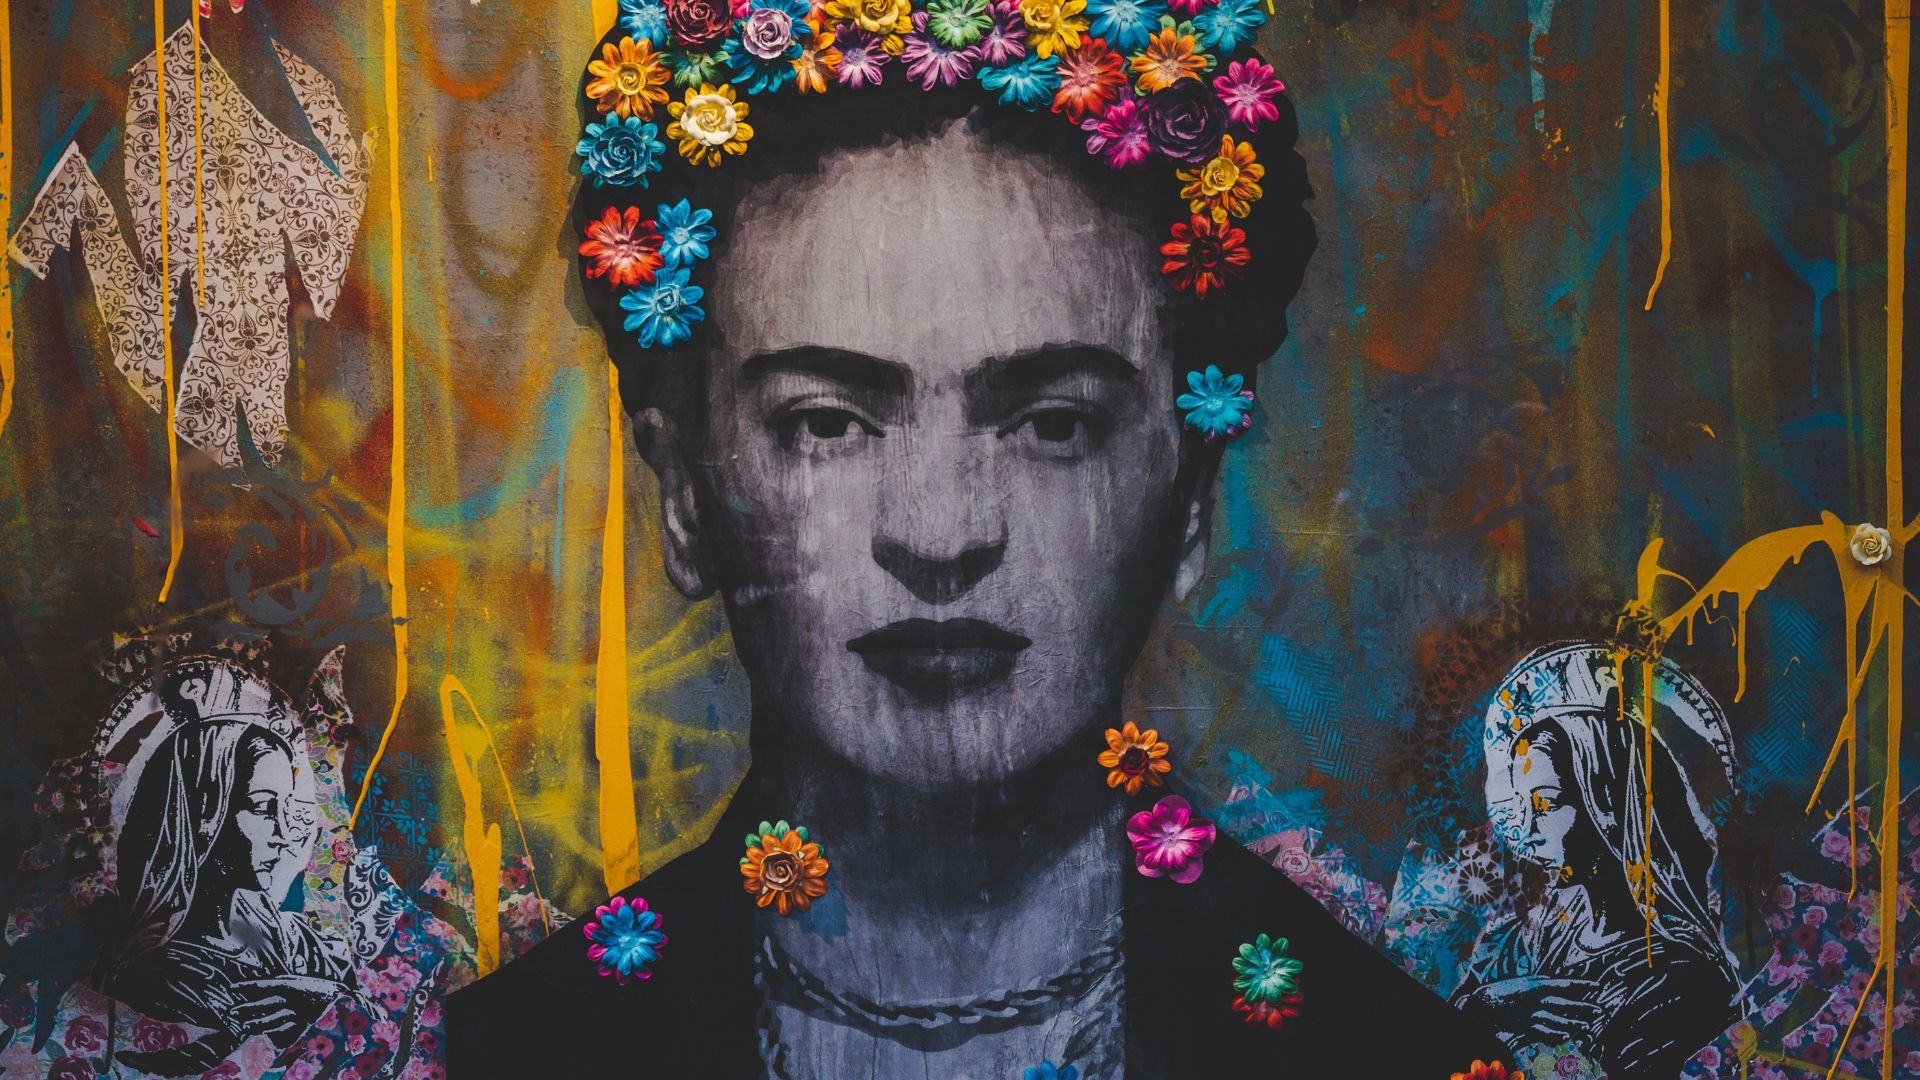 A black and white photograph of Frida Kahlo with a colorful flower crown and a necklace of flowers around her neck. - Frida Kahlo